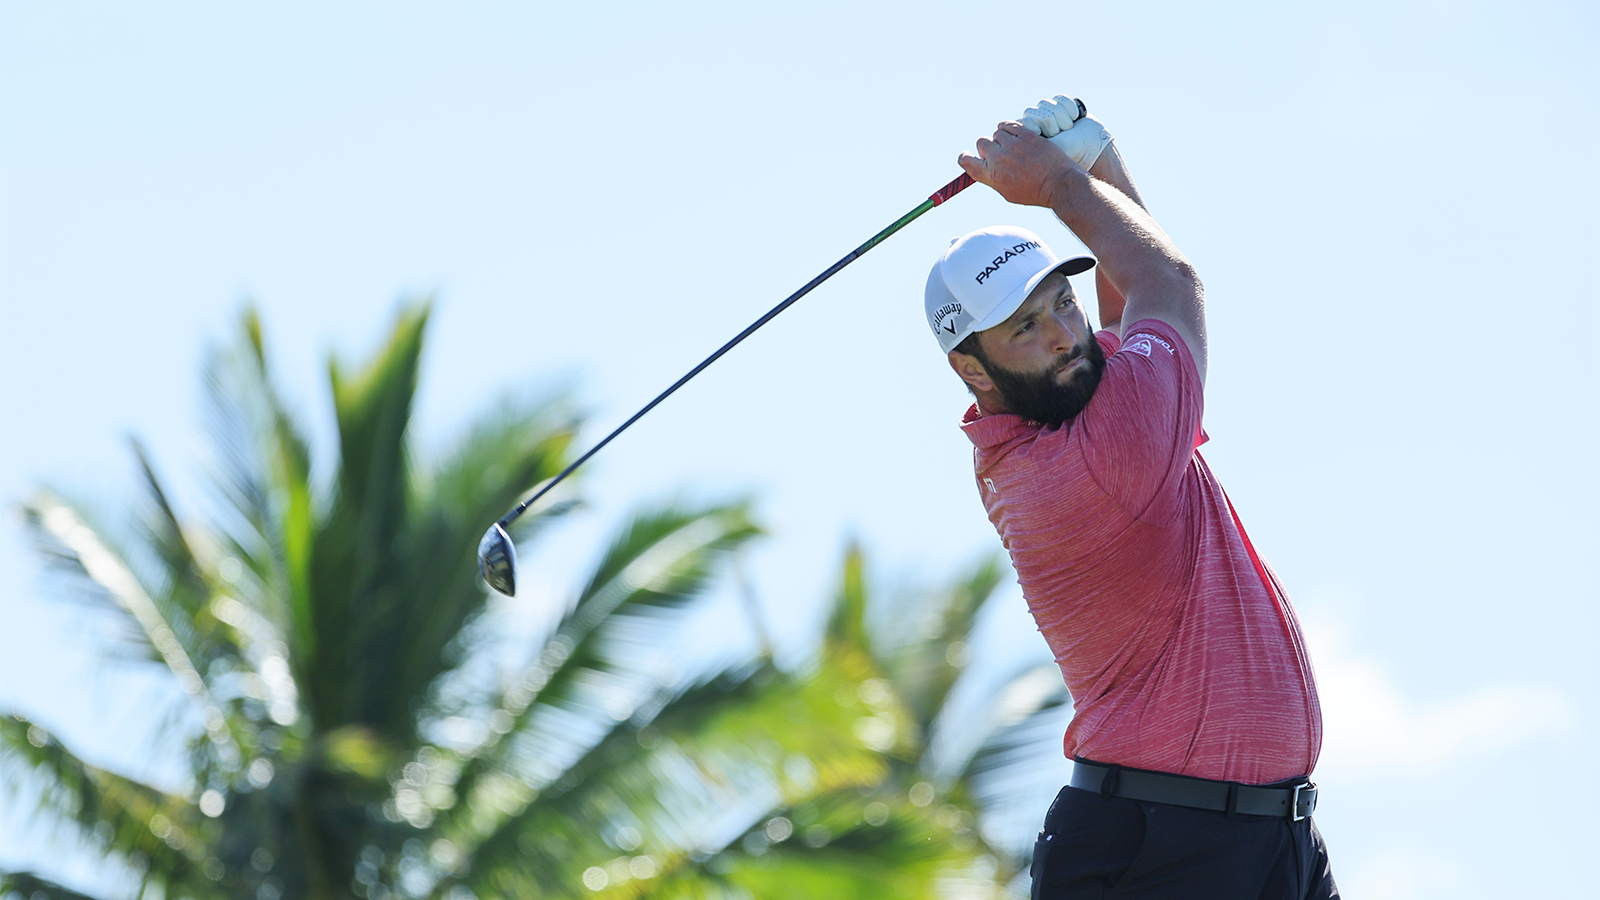 Jon Rahm of Spain plays his shot from the 17th tee during the final round of the Sentry Tournament of Champions at Plantation Course at Kapalua Golf Club on January 08, 2023 in Lahaina, Hawaii. (Photo by Andy Lyons/Getty Images)